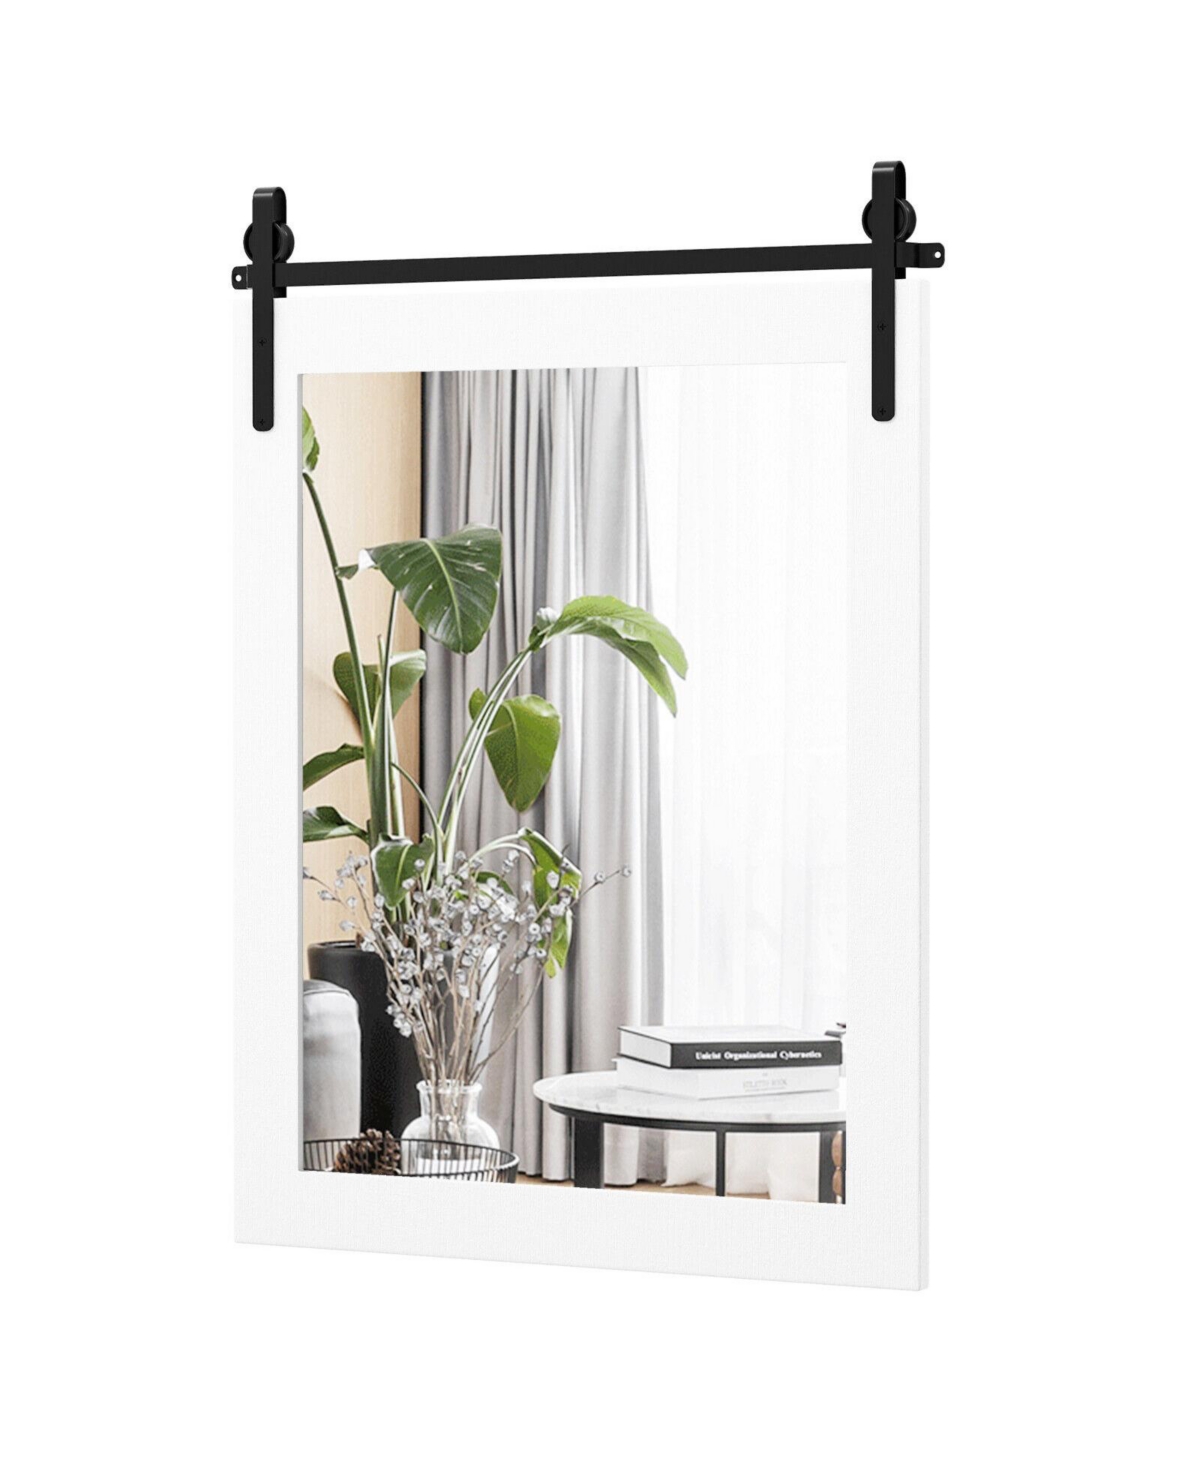 30 x 22 Inch Wall Mount Mirror with Wood Frame - White